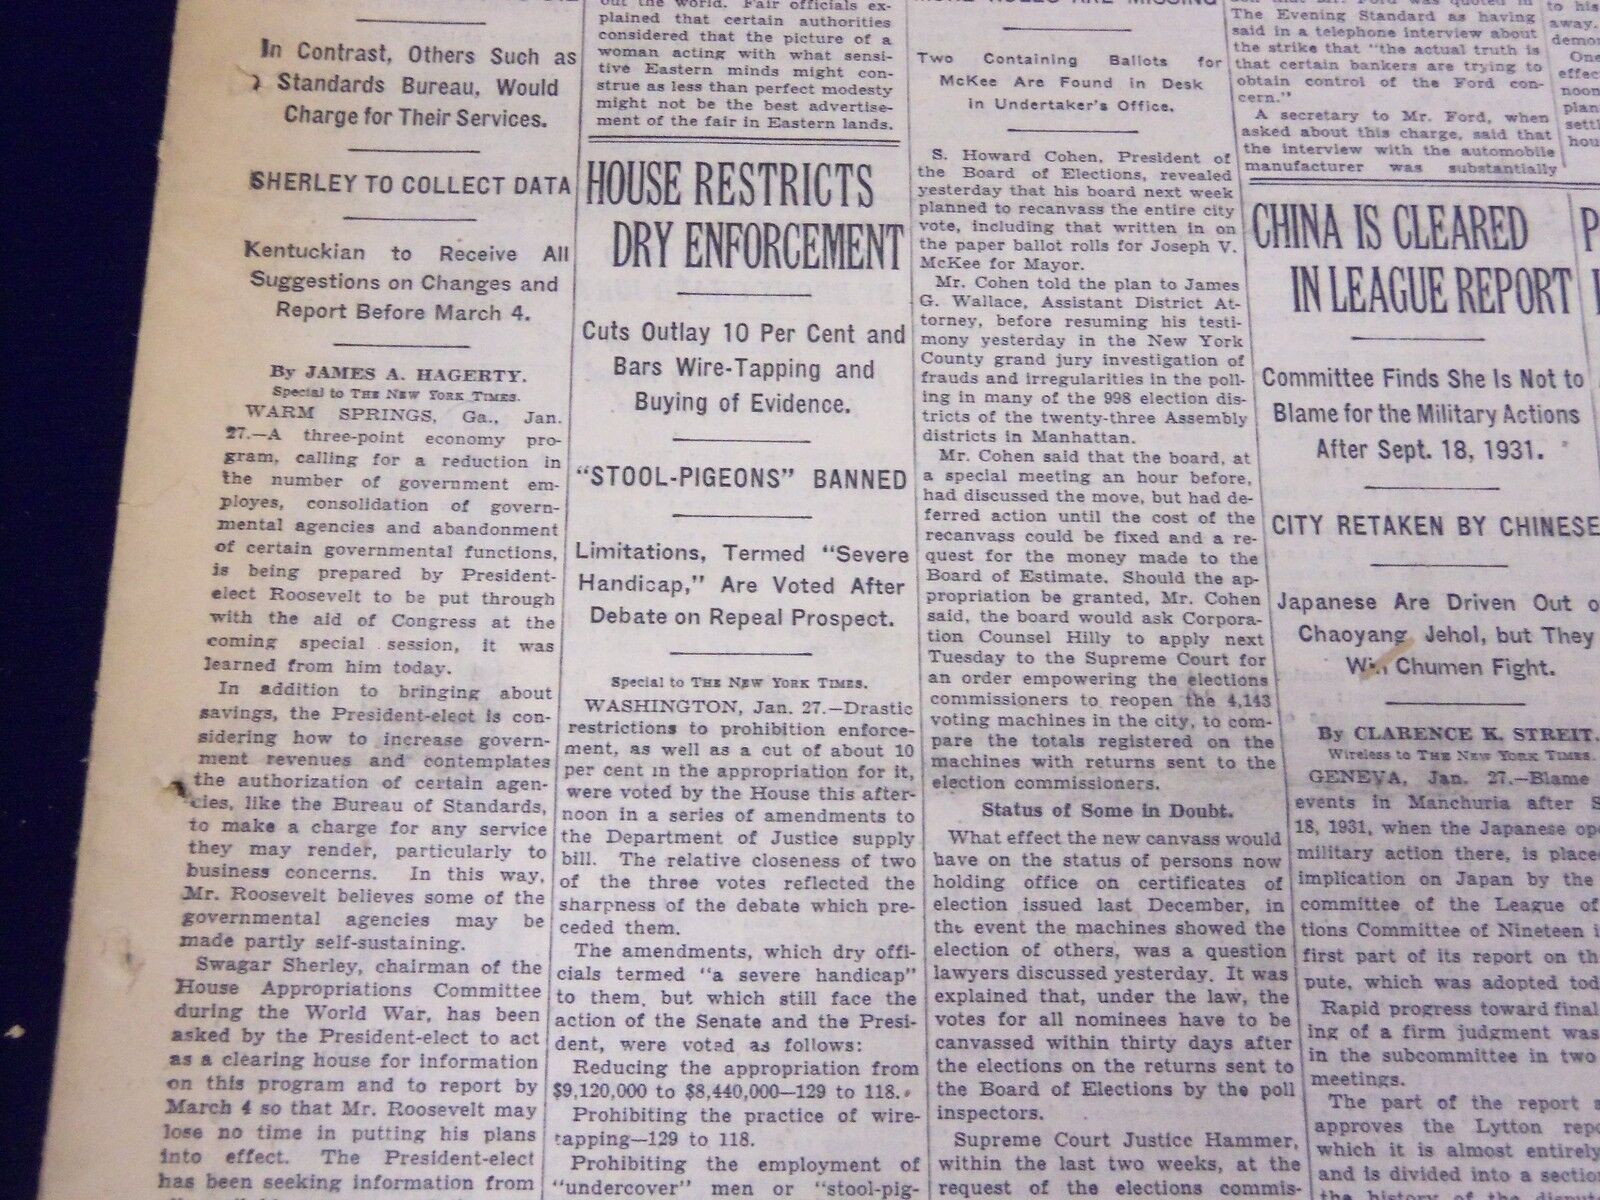 1933 JANUARY 28 NEW YORK TIMES - RESTRICT DRY ENFORCEMENT - NT 3881